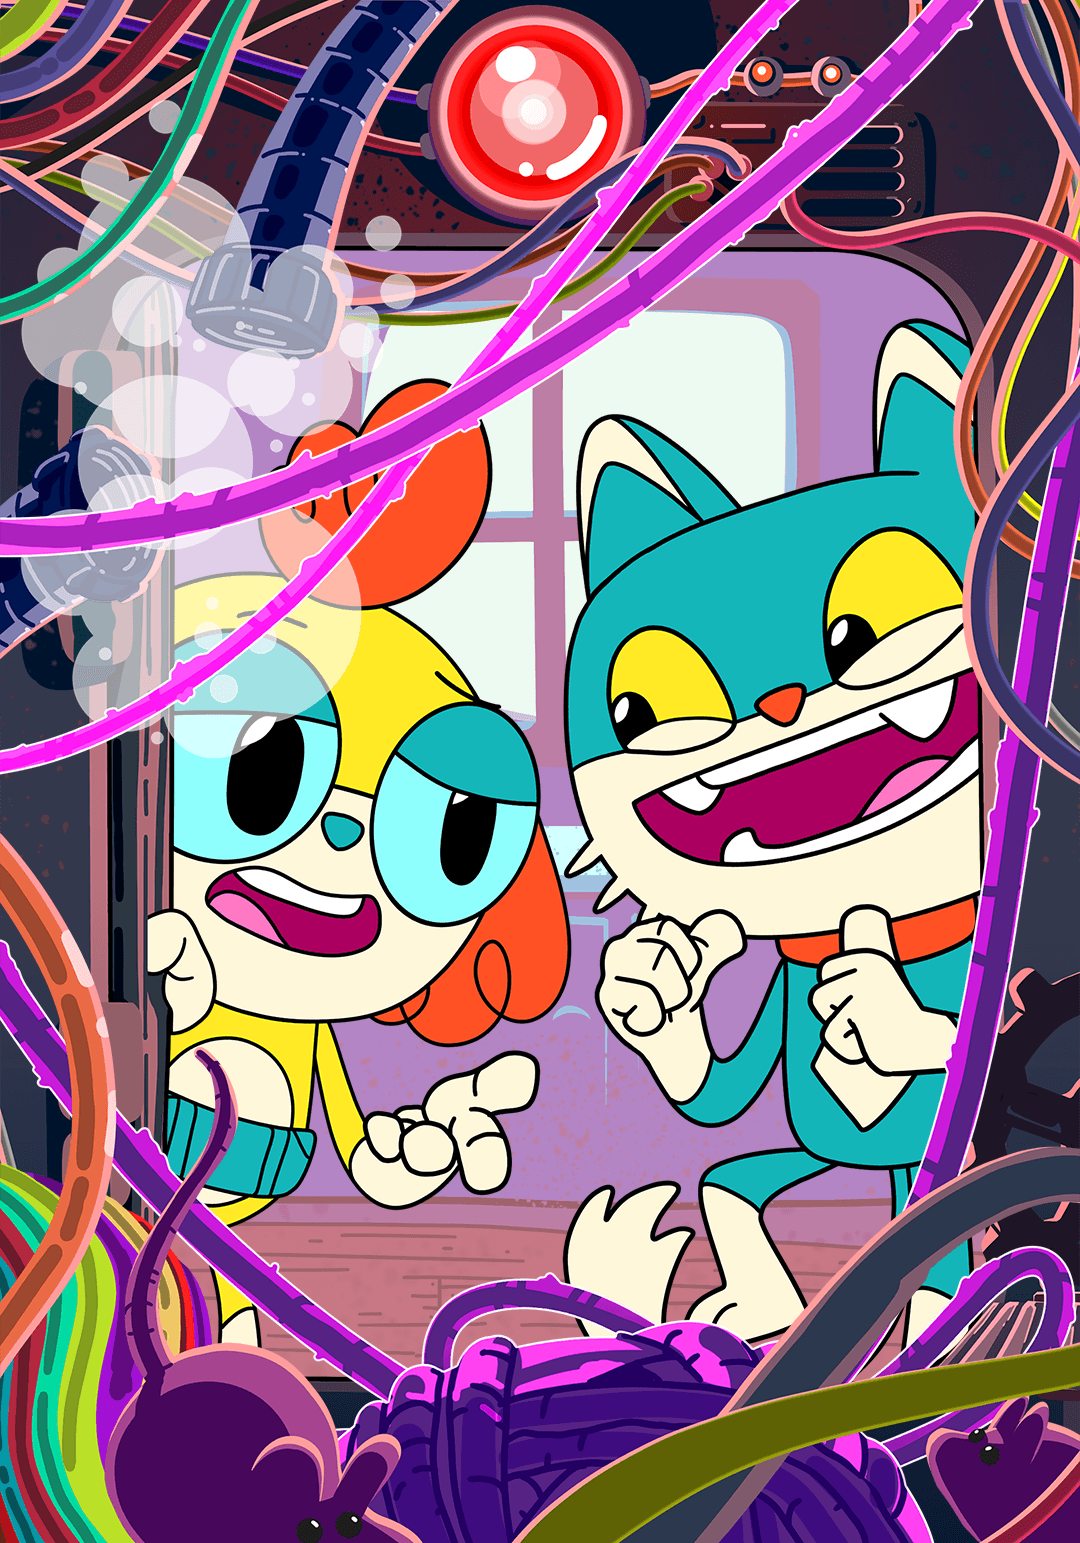 Dots (a yellow anthropomorphic dog wearing galsses and a belt) and Diamond (A light blue and white cat with yellow eyes) peering through a mess of colourful cables.